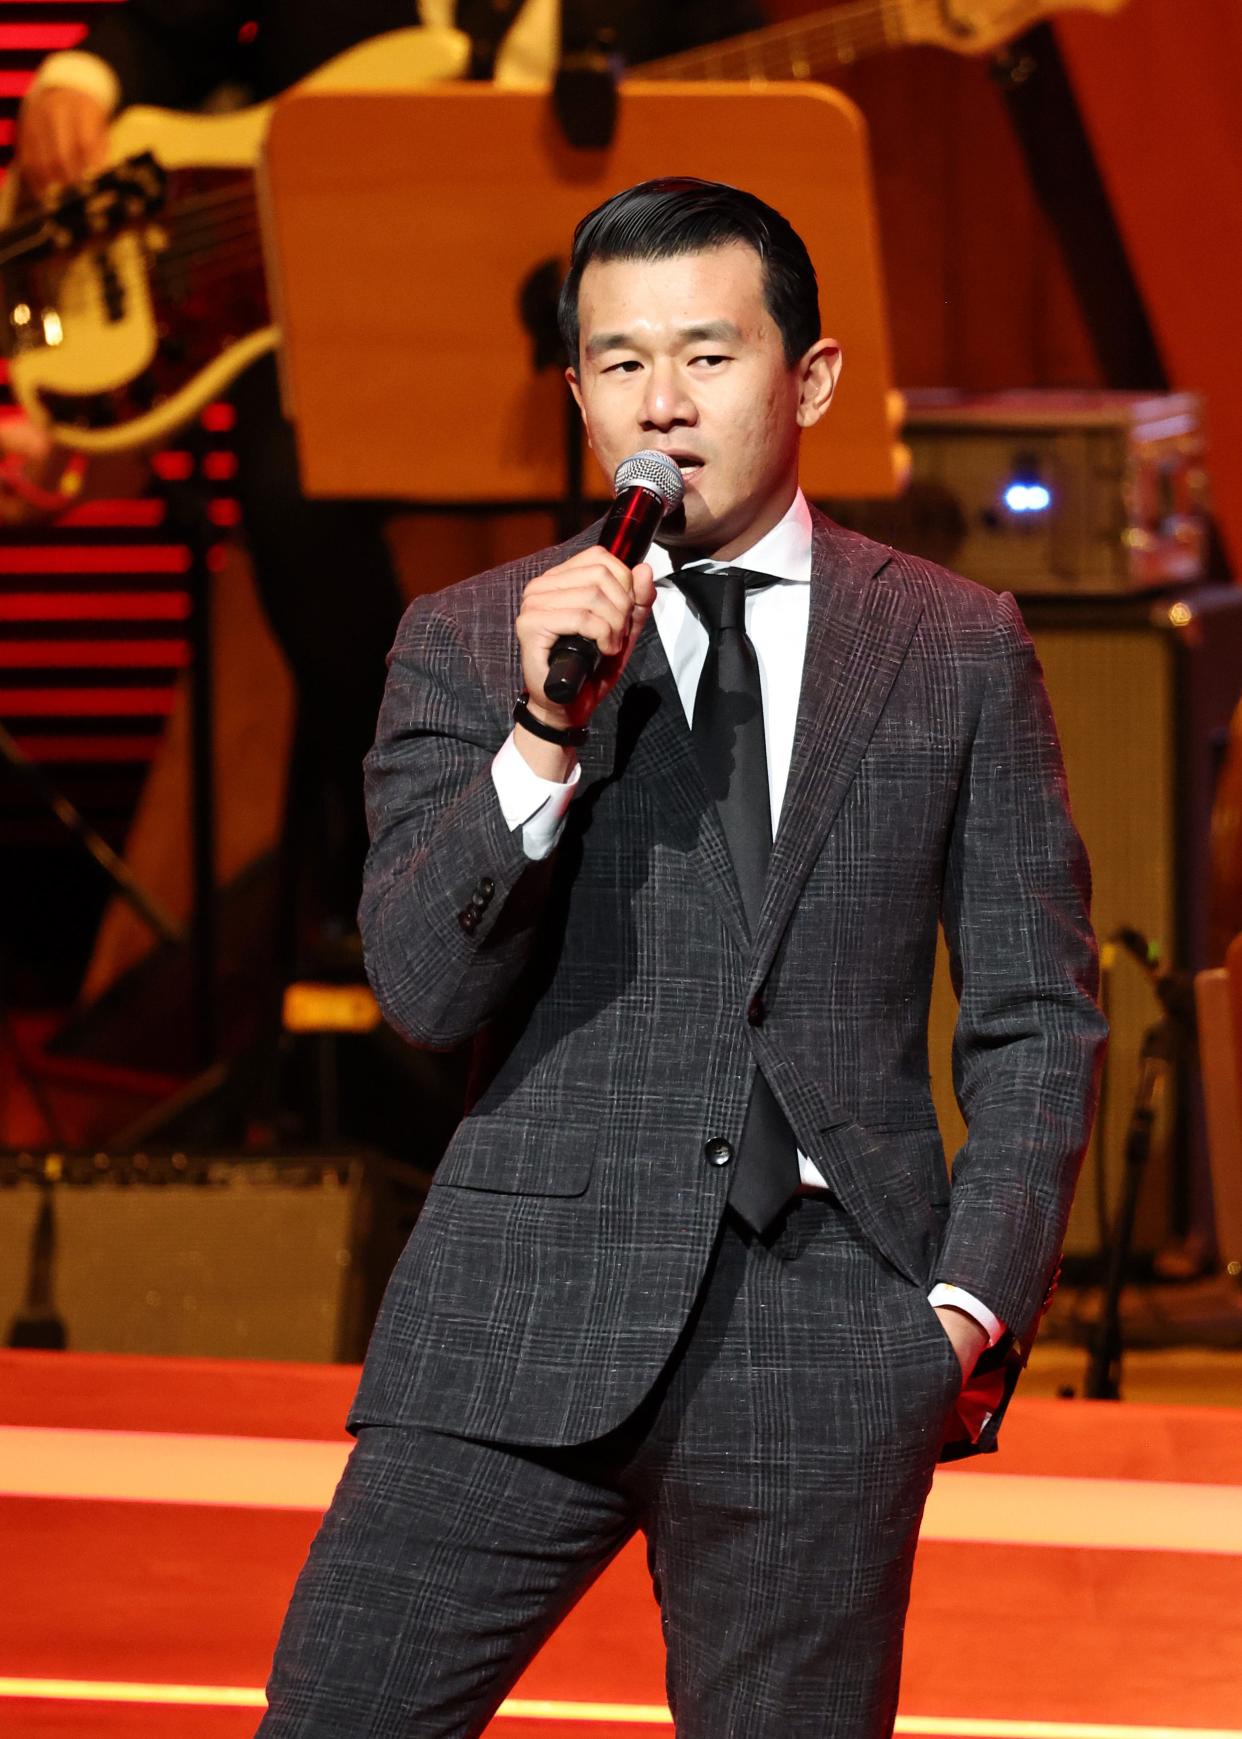 Ronny Chieng performed at Moontower Just For Laughs in 2019. He will return to perform at Bass Concert Hall during this year's event.